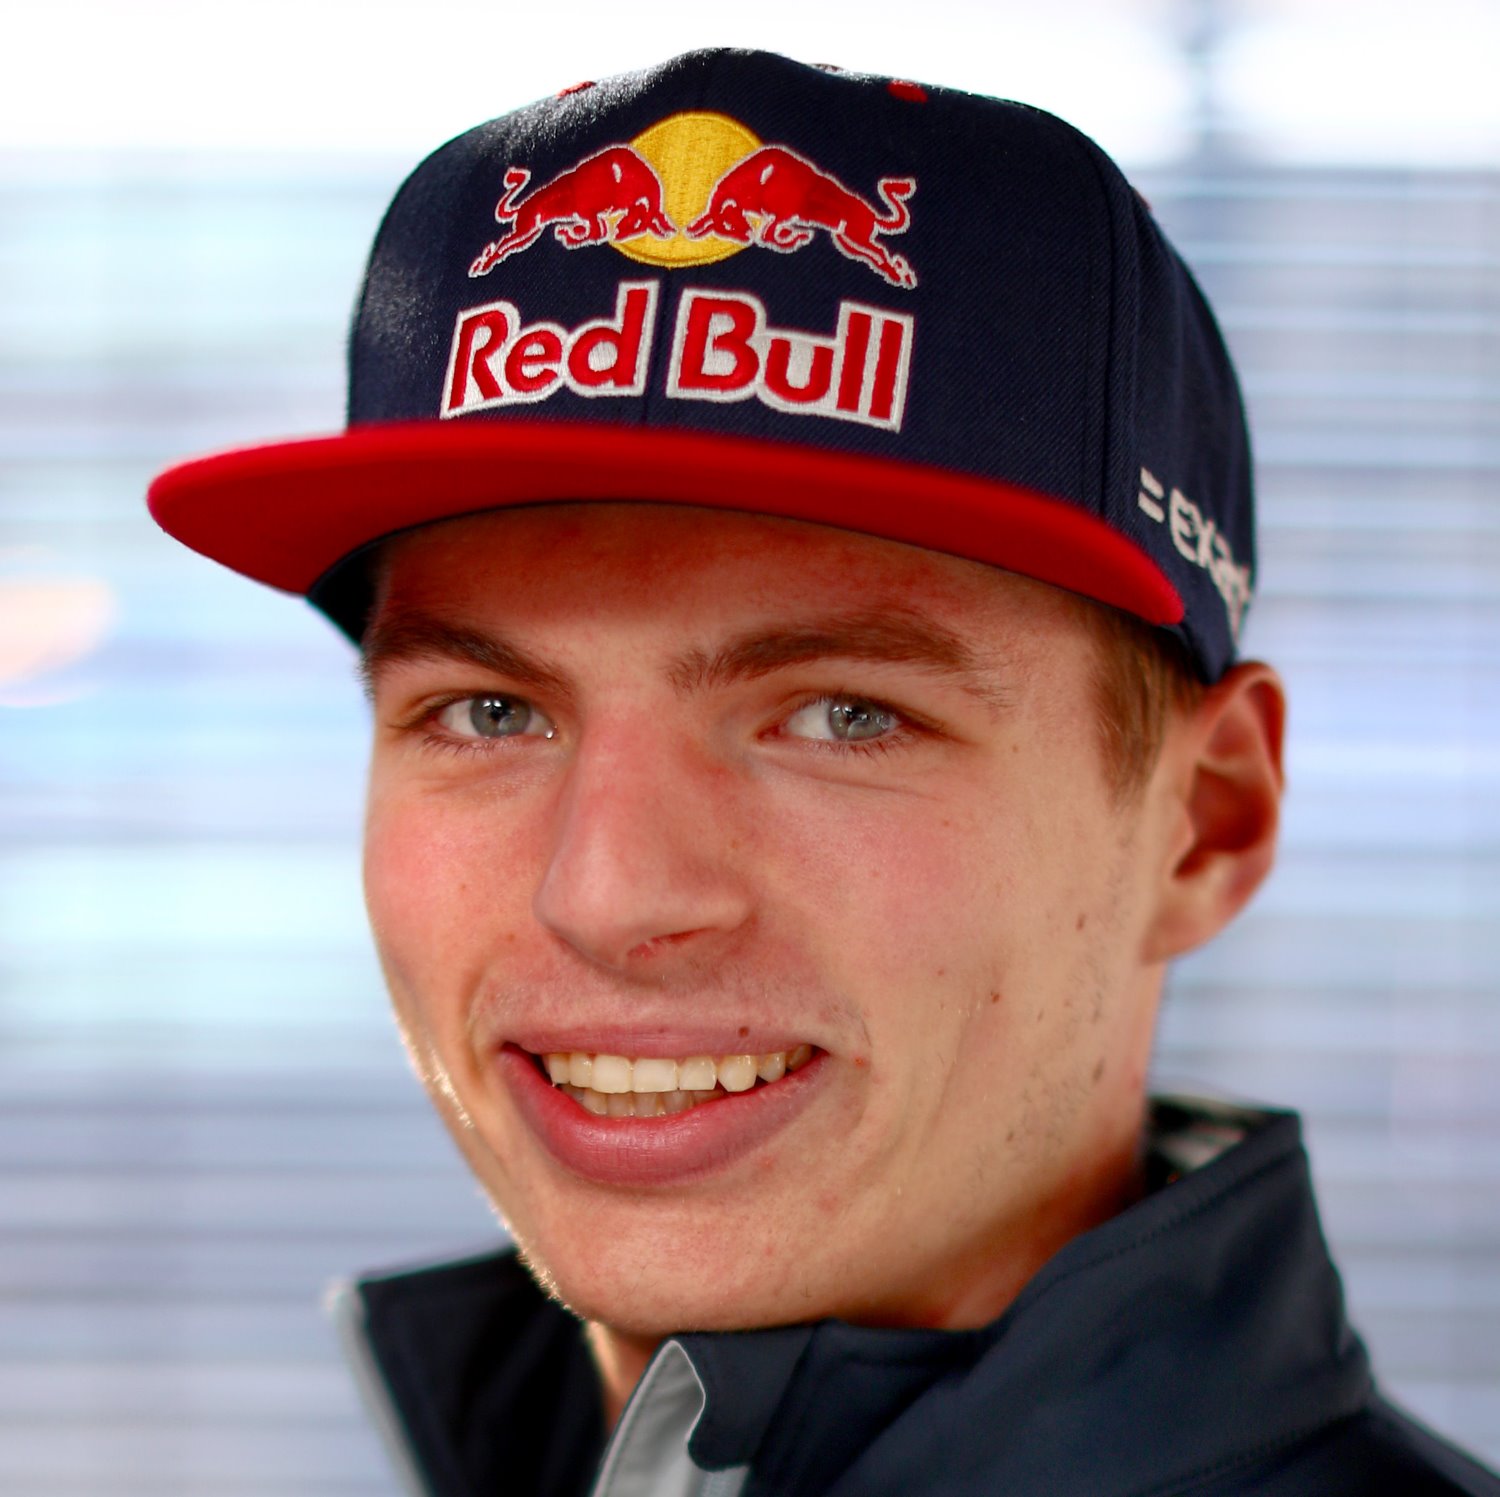 Max Verstappen being eyed by Mercedes and Ferrari